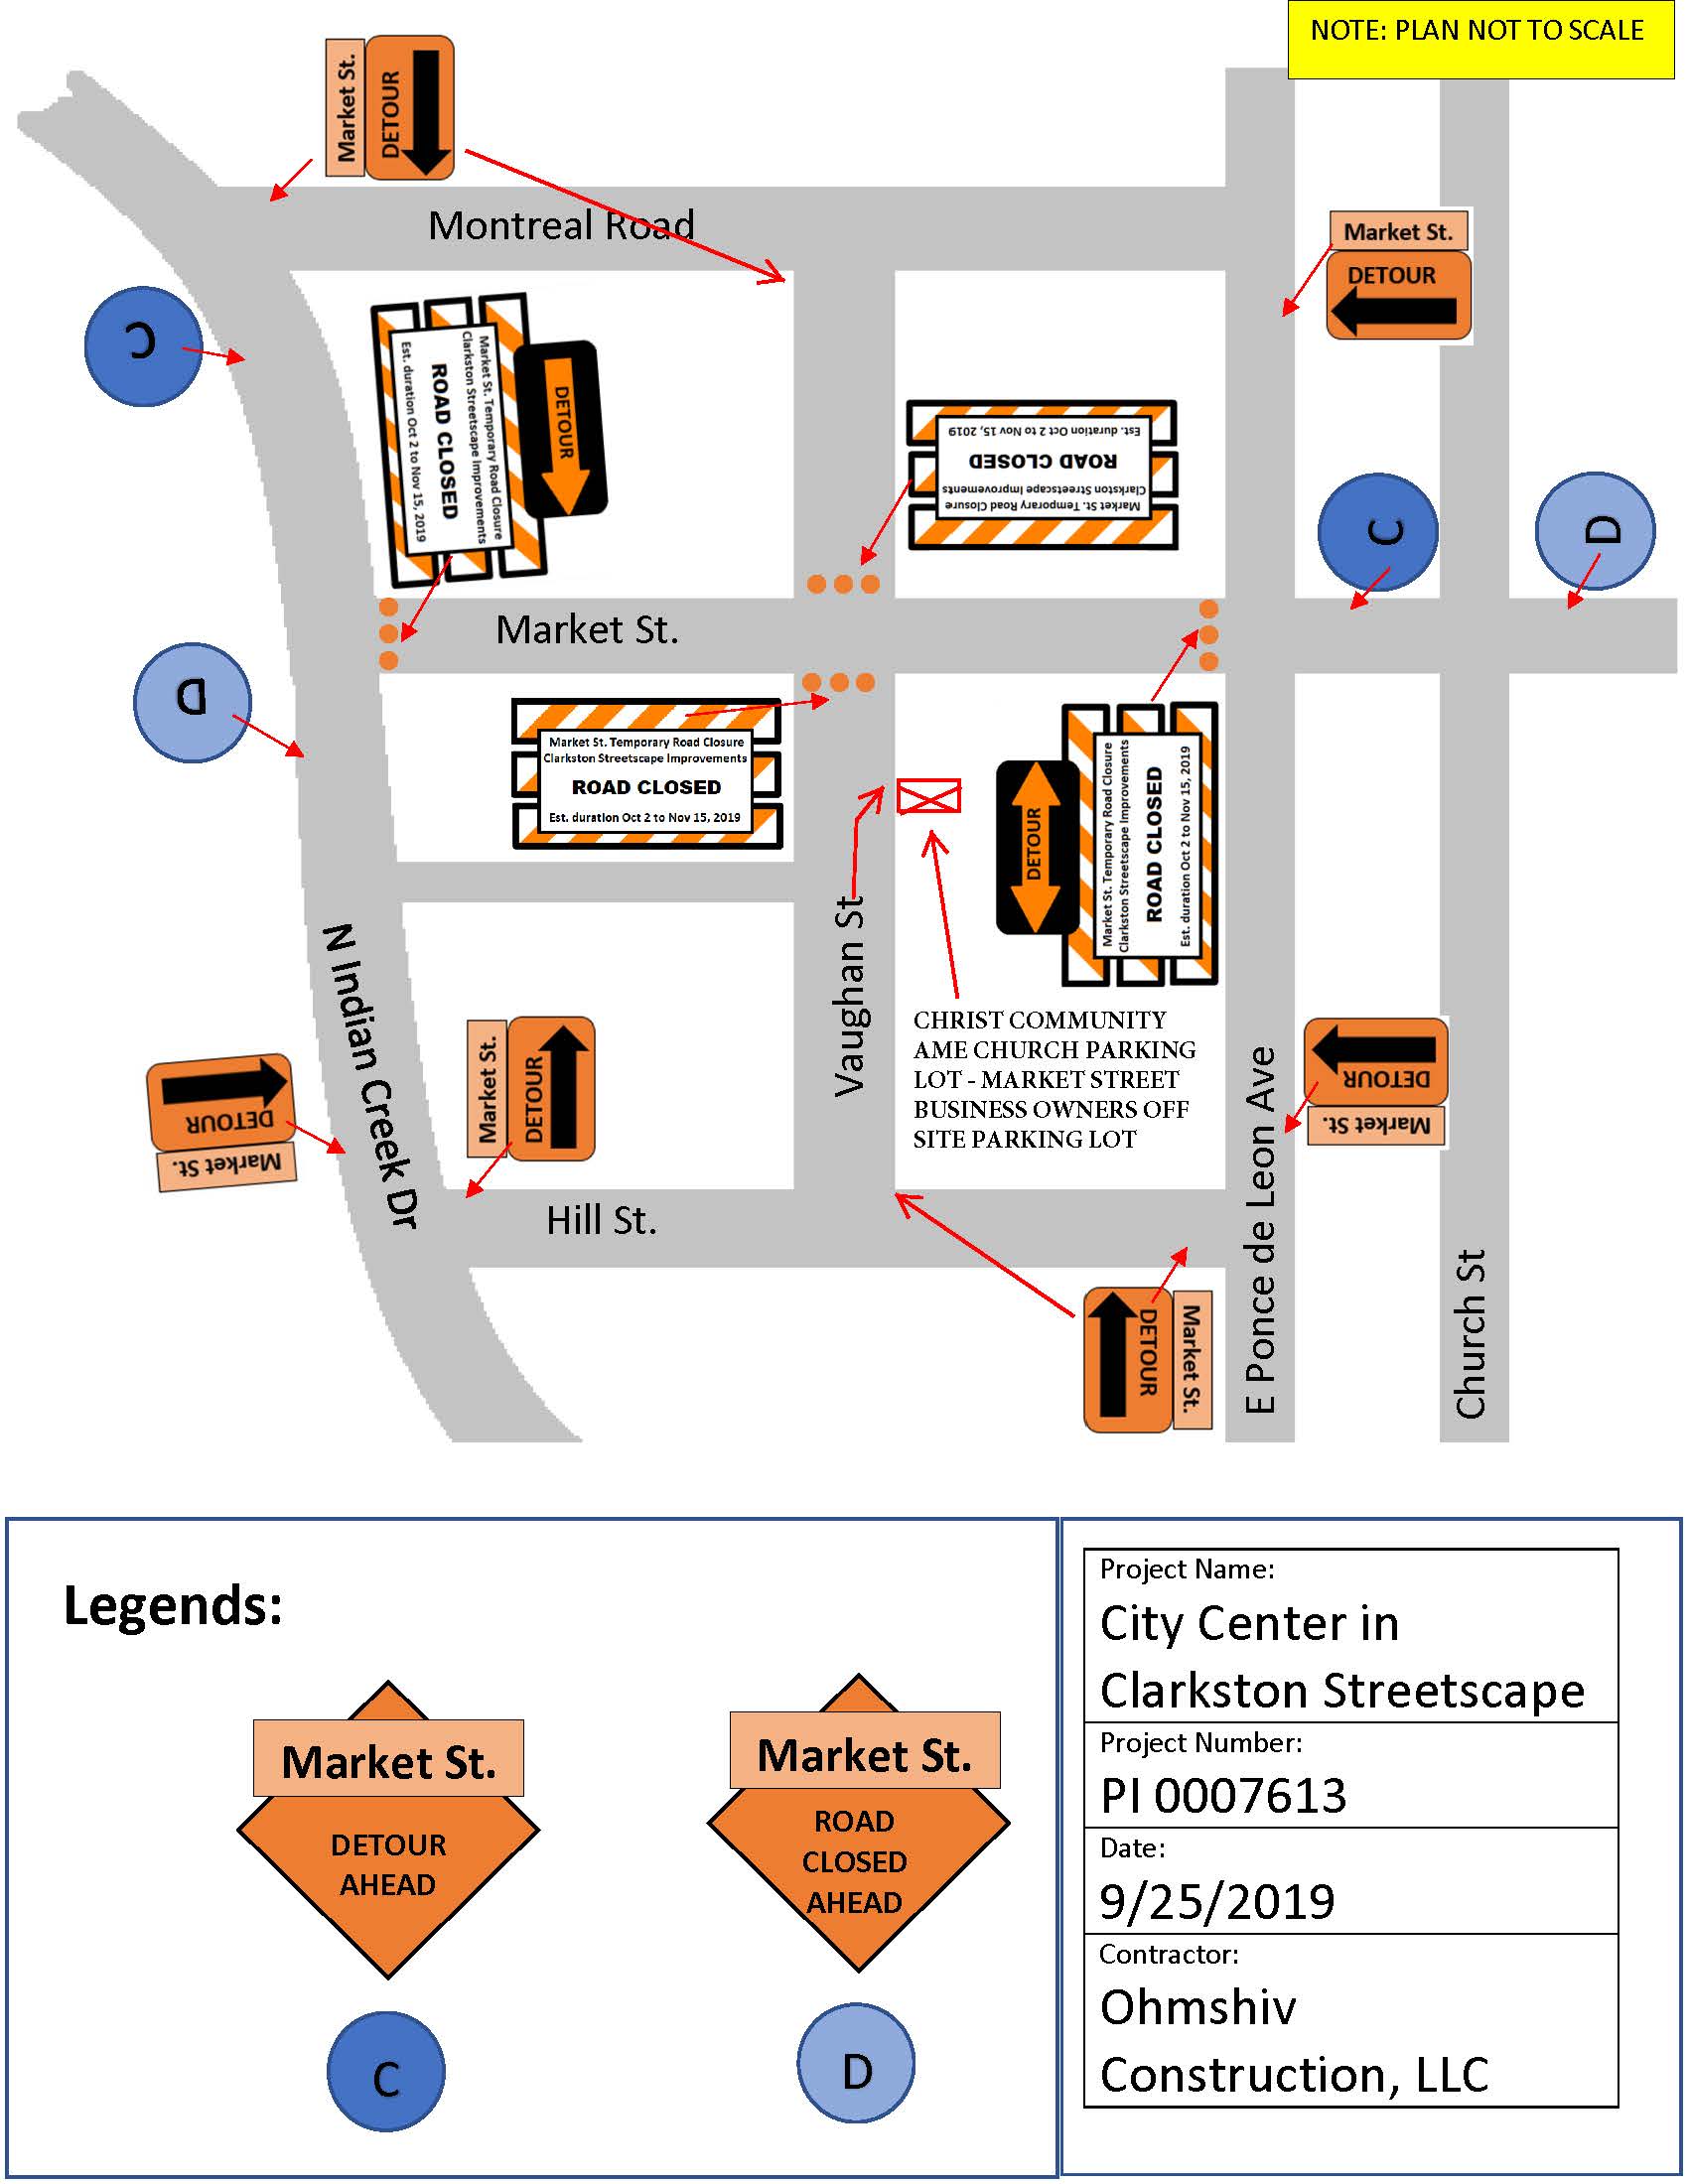 updated Market Street Road Closure route signage